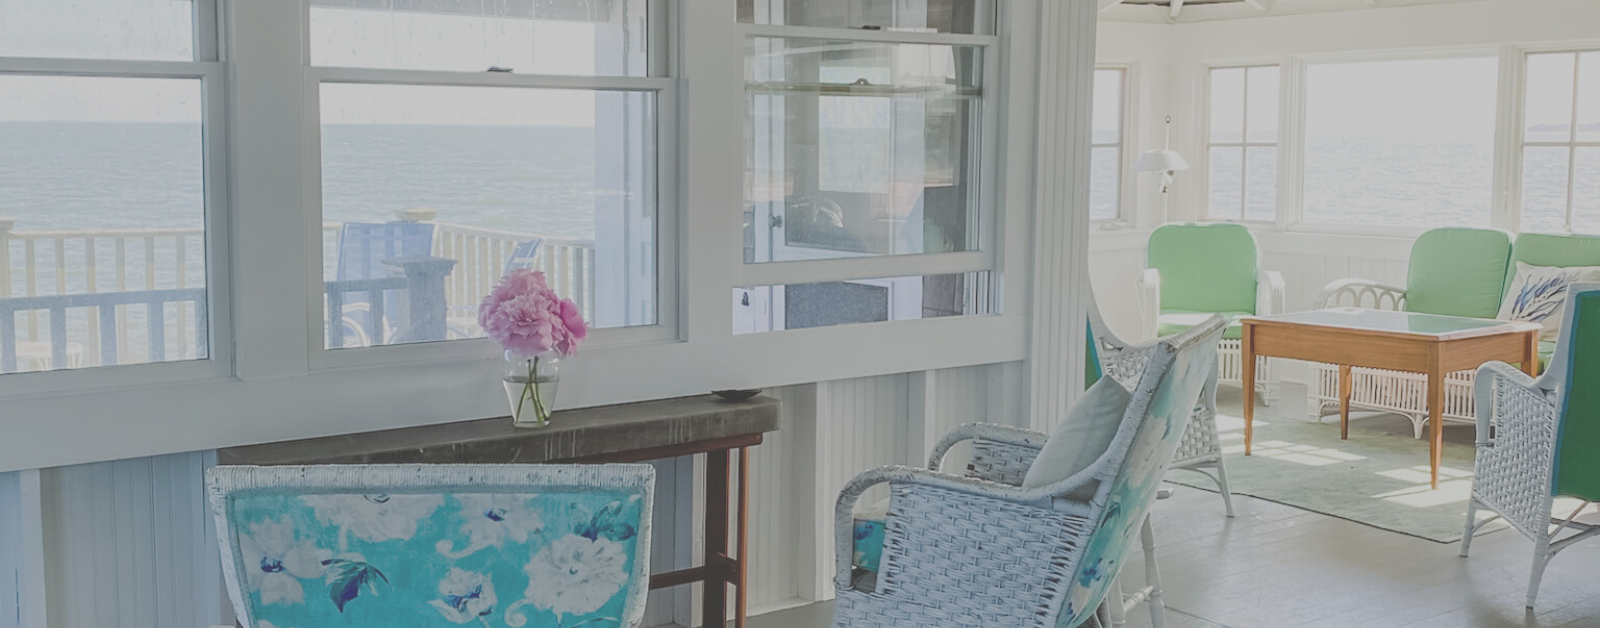 pink flowers on a table in a beach house in front of a window looking out at the ocean and surrounded by chairs